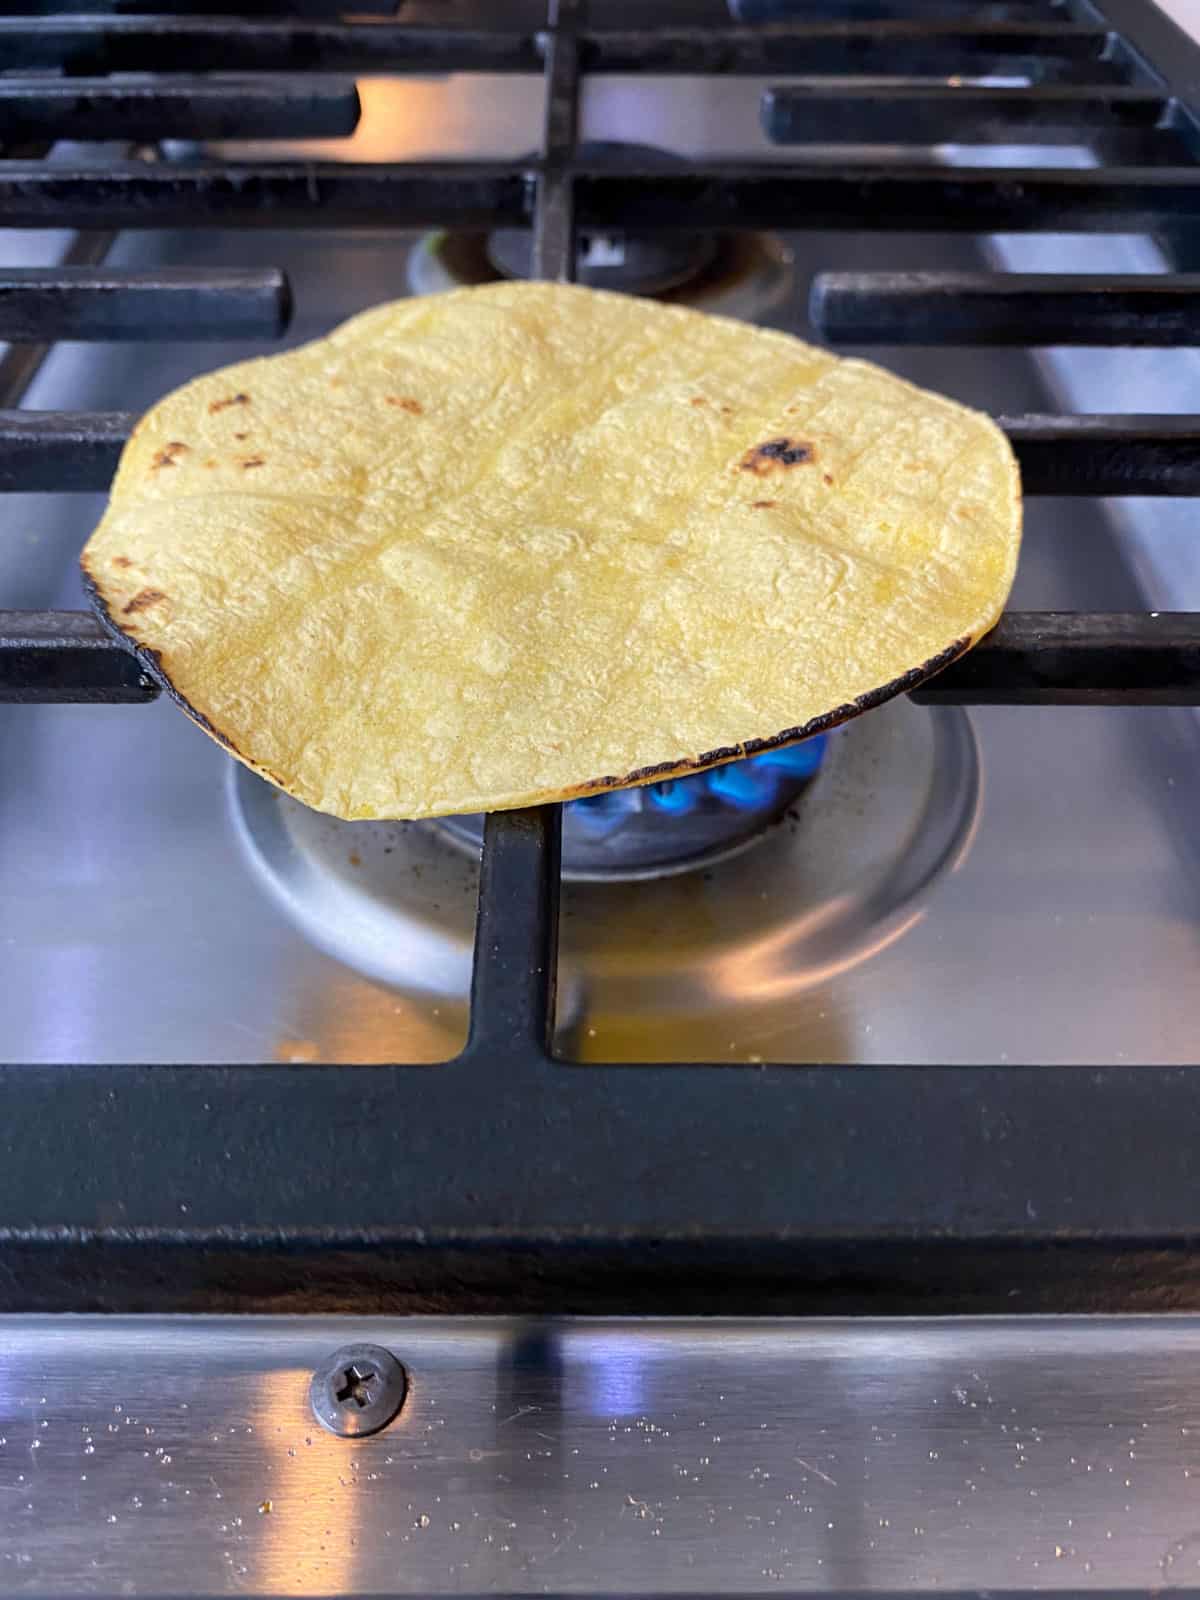 Char the corn tortilla directly on the stove top until the edges are lightly charred.